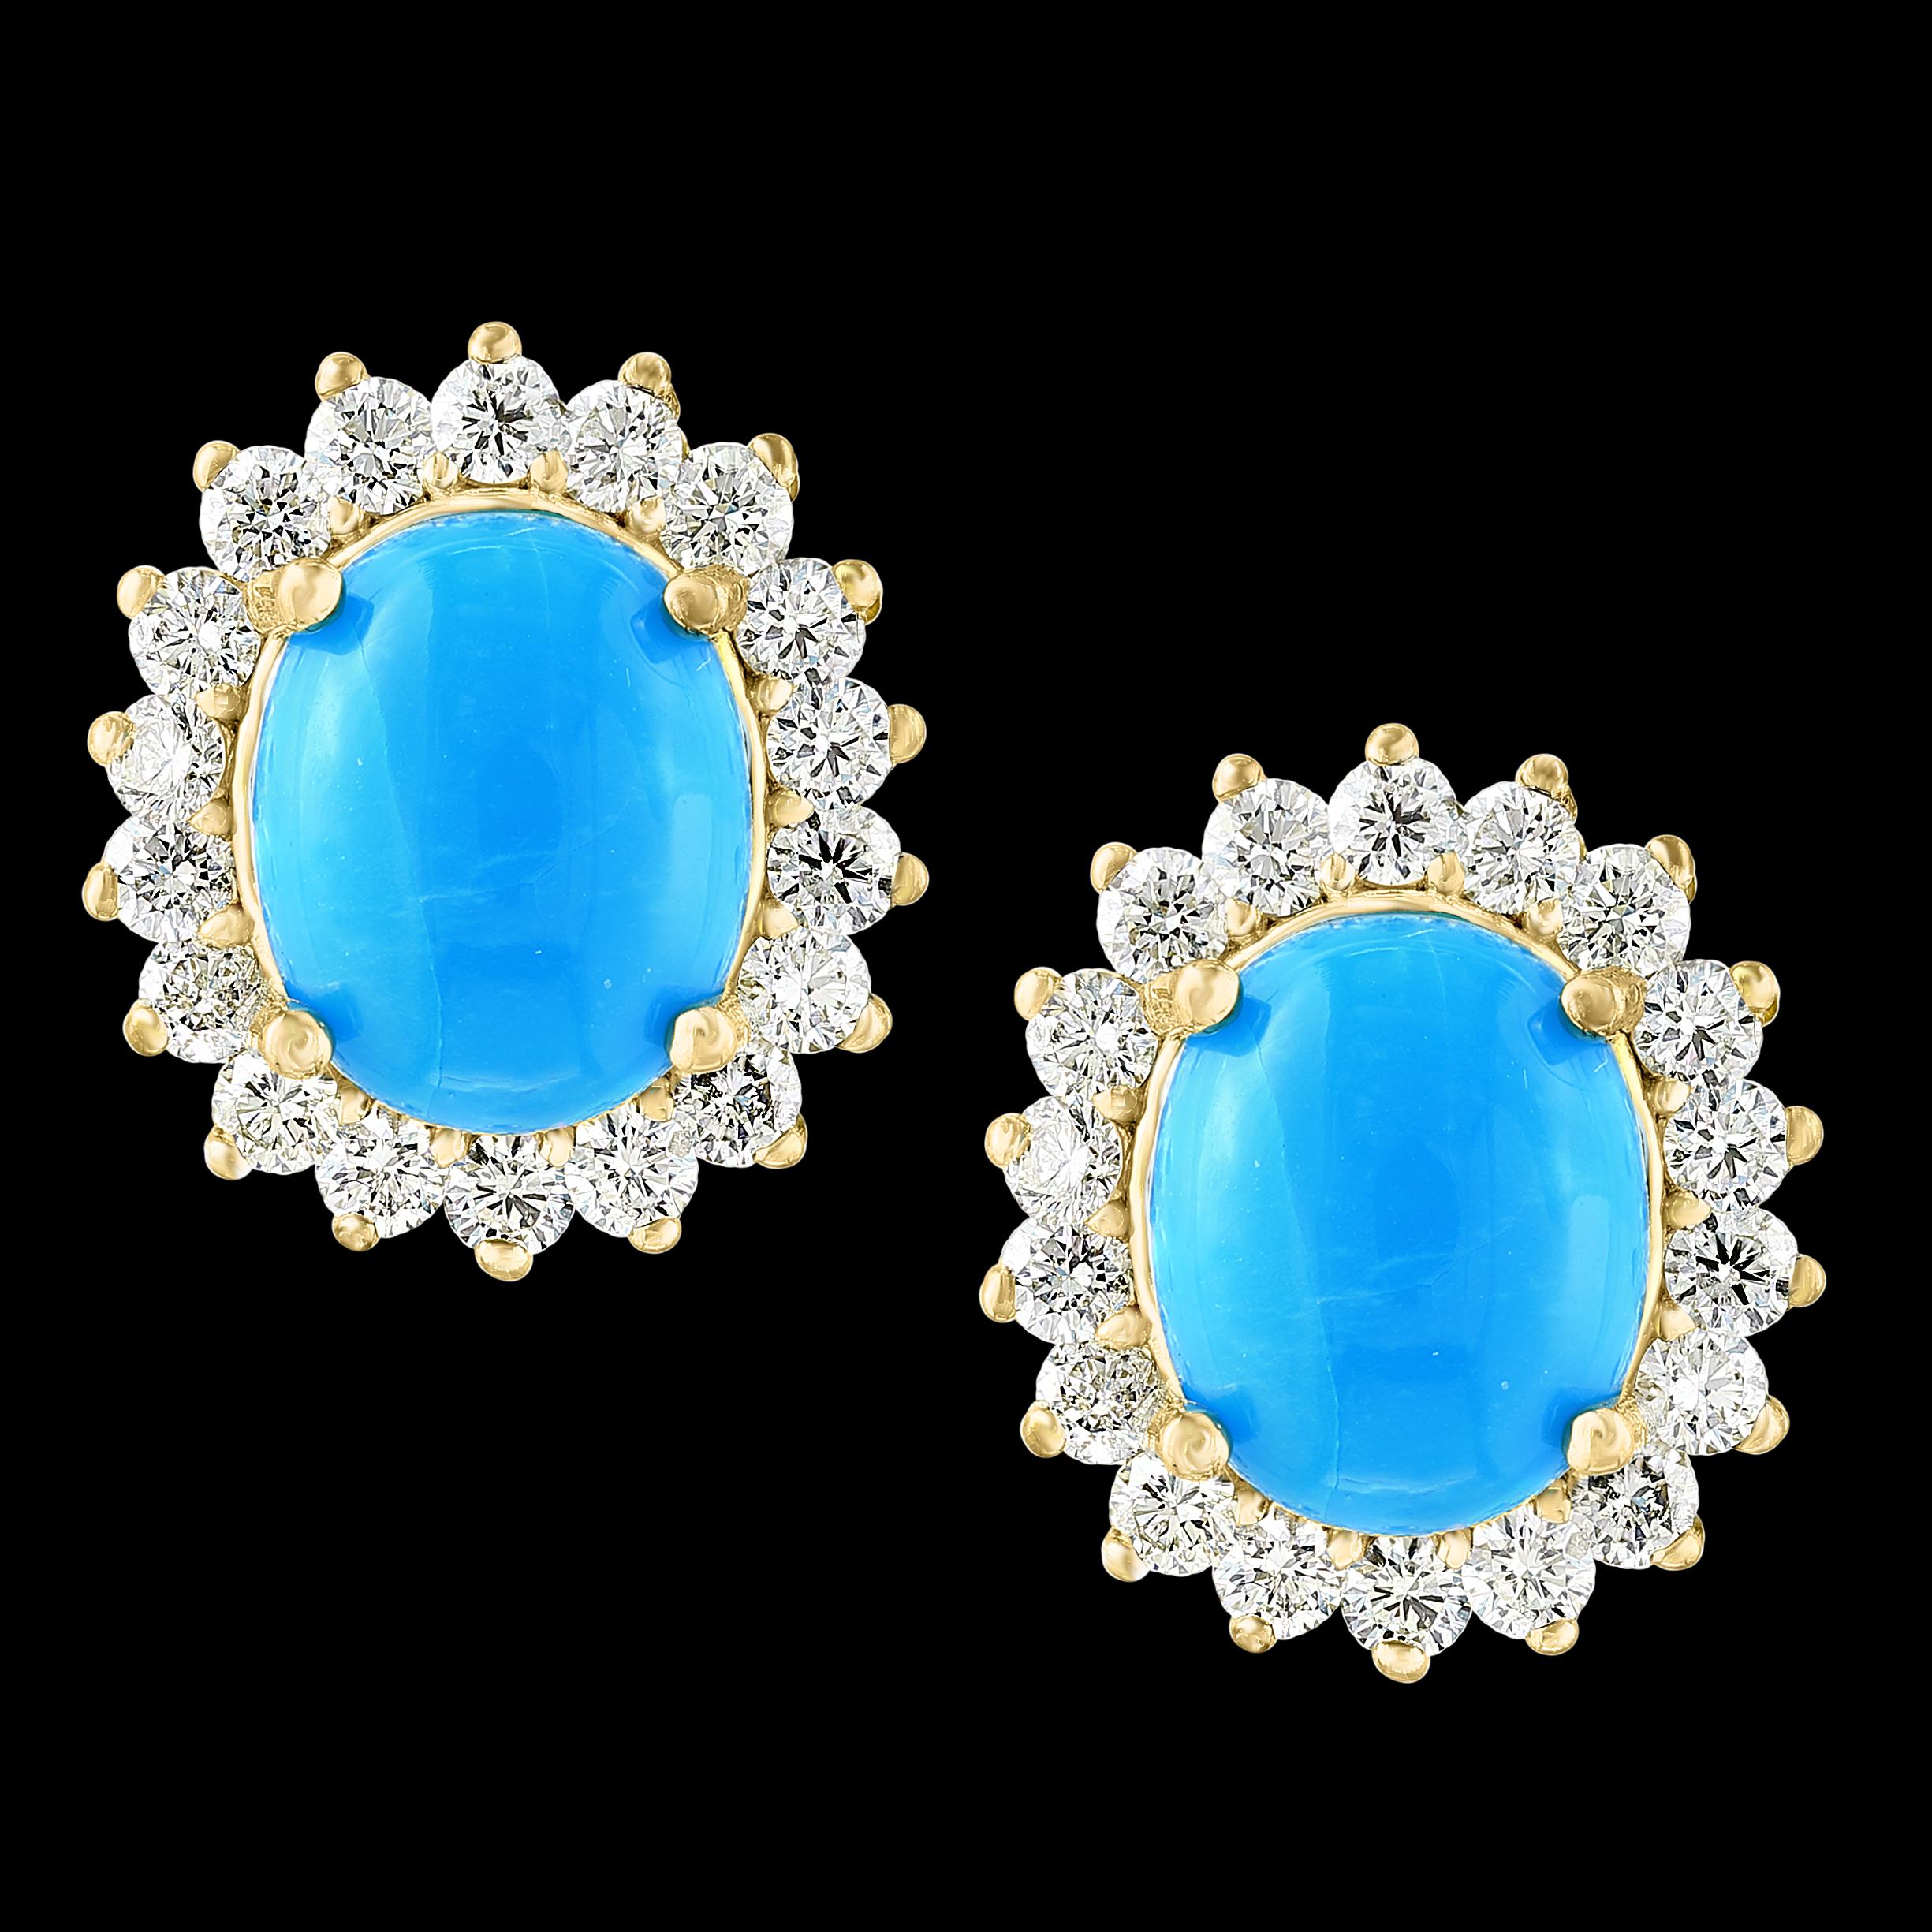 8 Ct Oval Sleeping Beauty Turquoise & 1.5 Ct Diamond Stud Earrings 14 Karat Yellow Gold, Post Back
This exquisite pair of earrings are beautifully crafted with 14 karat Yellow gold .
Weight of 14 K gold 7.30 Grams
Turquoise pair is natural sleeping